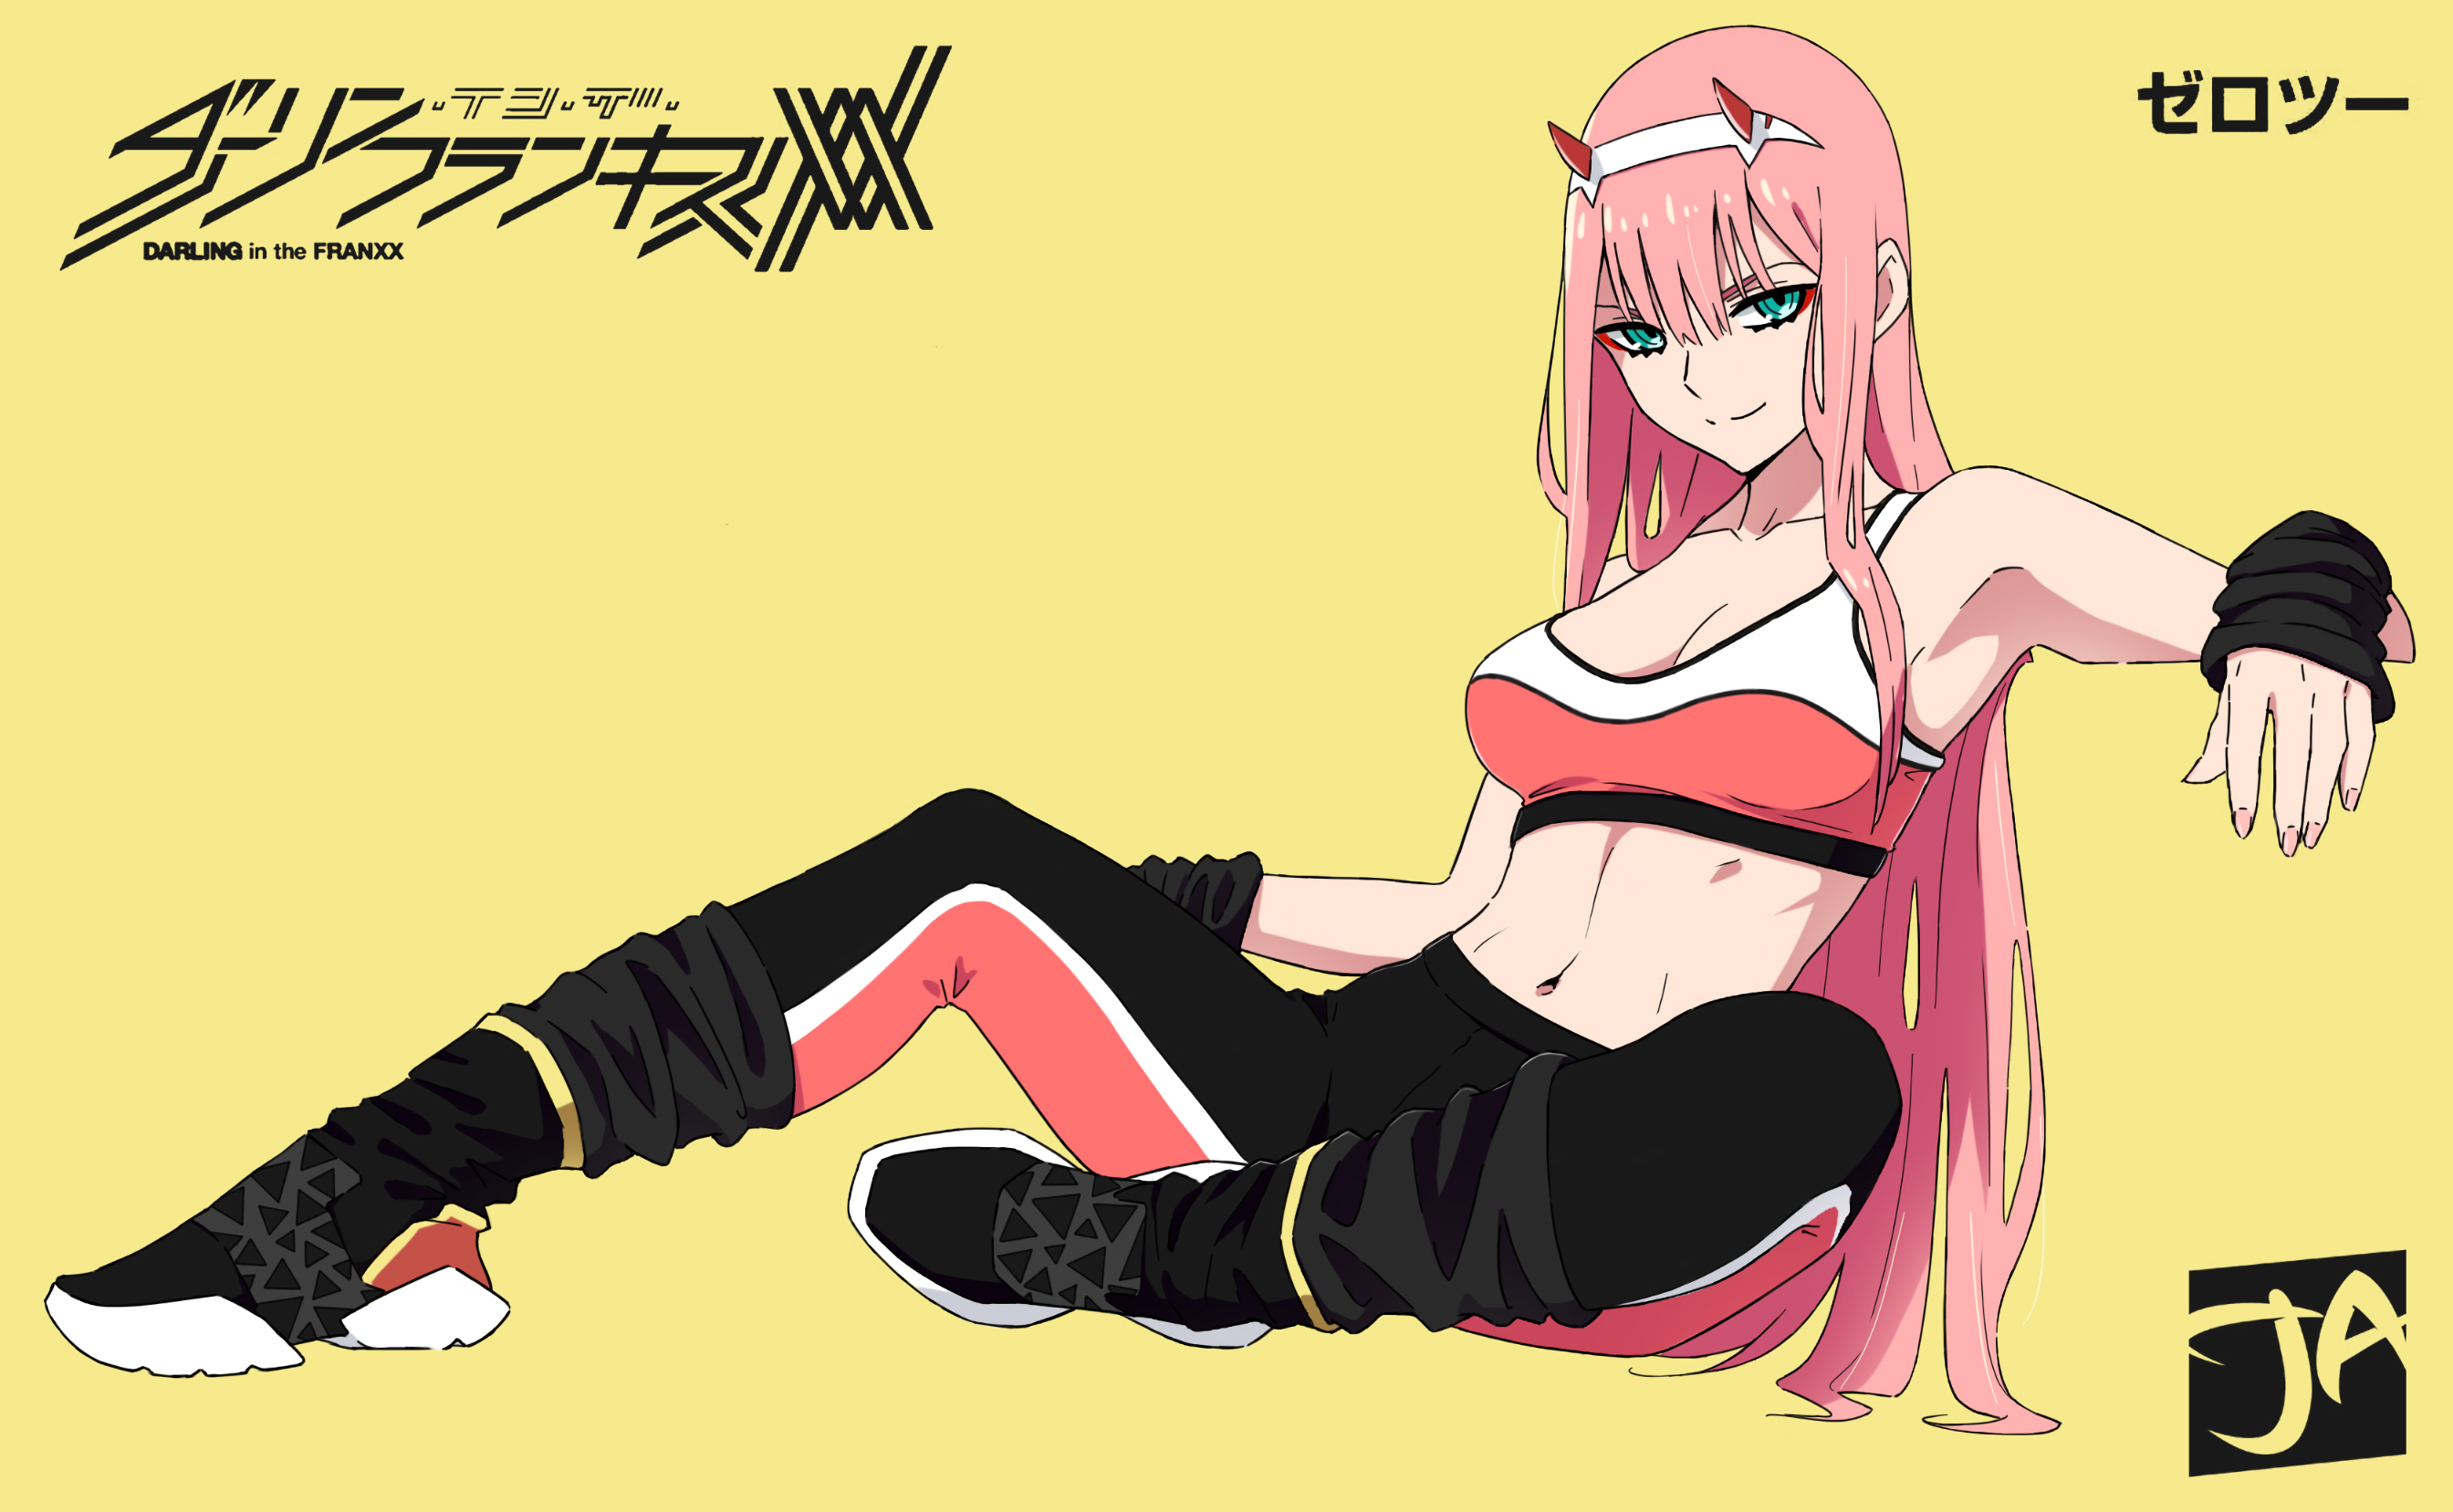 Anime 2688x1657 Zero Two (Darling in the FranXX) Darling in the FranXX anime girls simple background yellow background pink hair long hair horns fan art digital art logo Reebok sports bra sportswear yoga pants J Adsen 2D thighs belly button pink nails cleavage